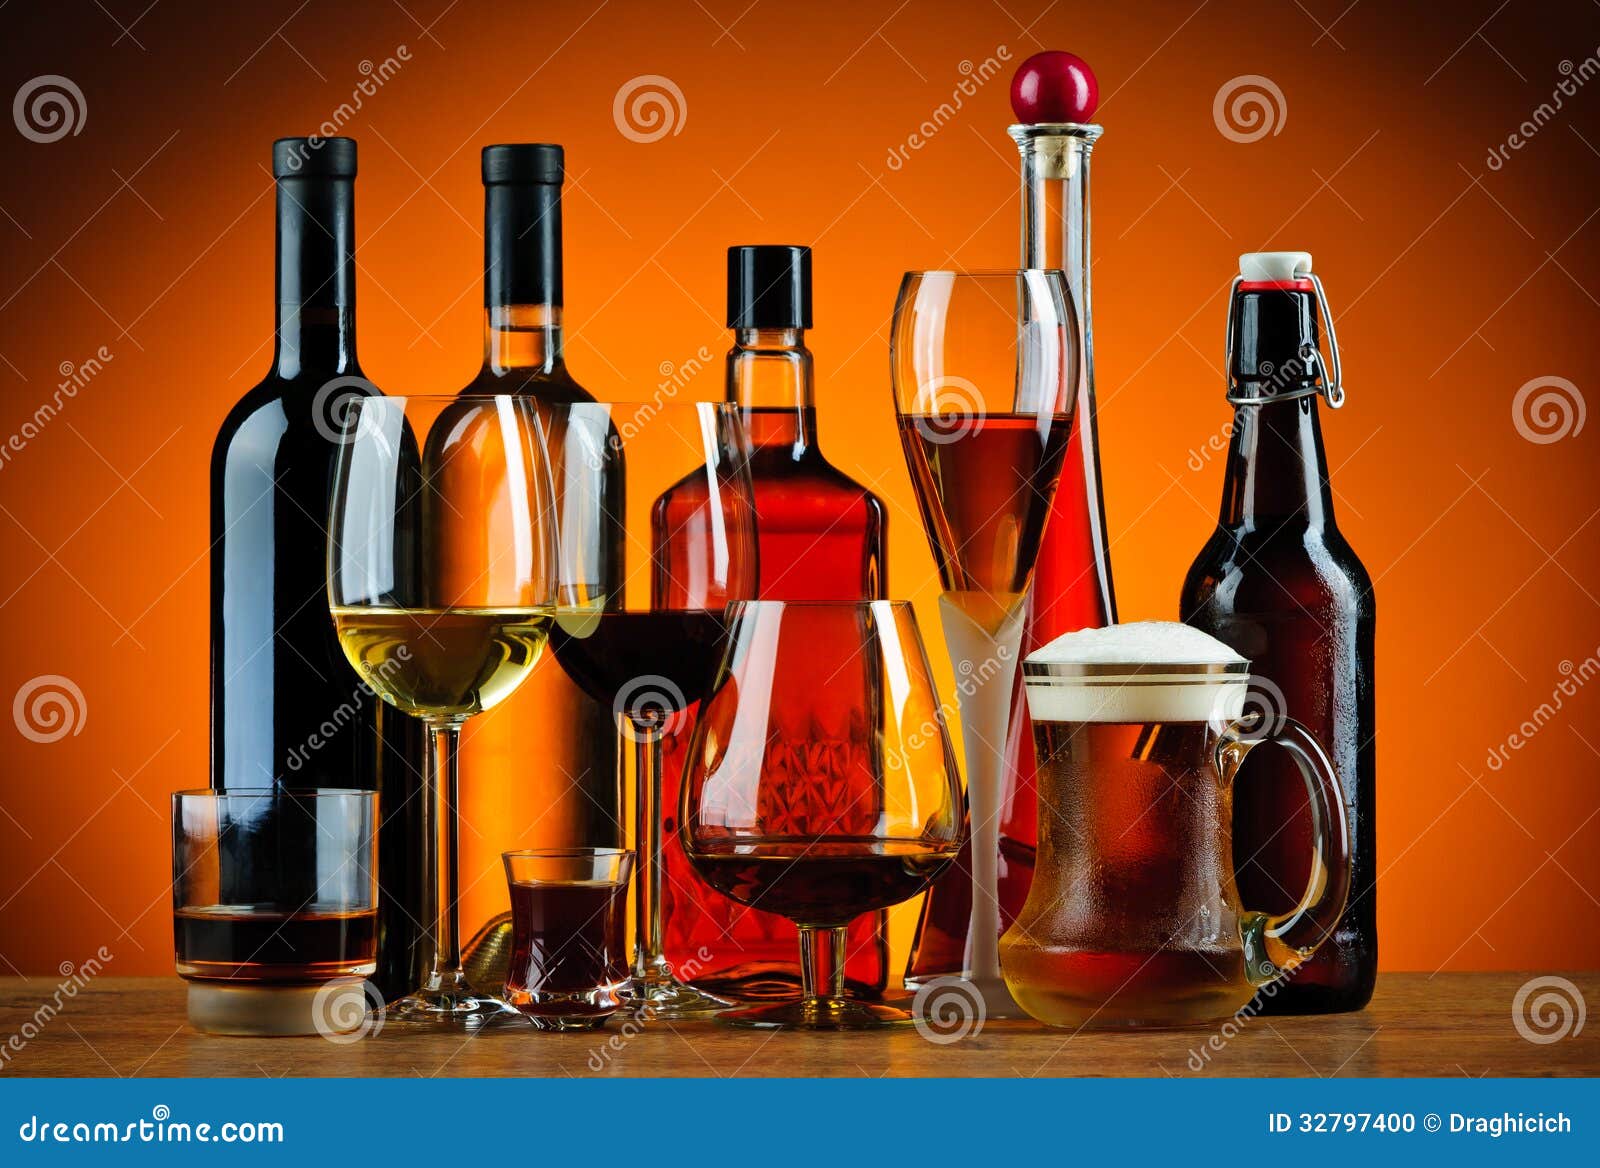 bottles and glasses of alcohol drinks